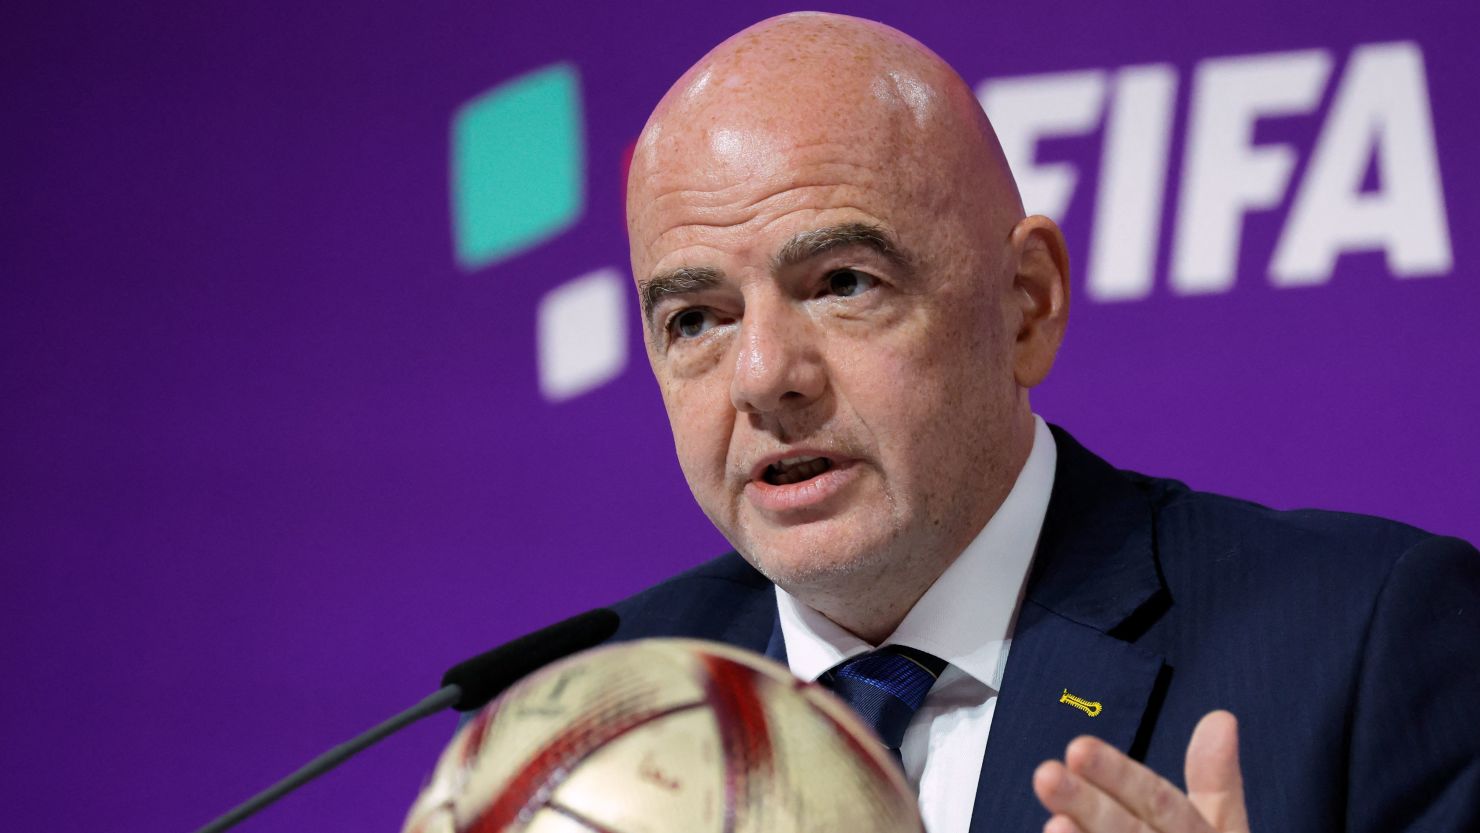 2022 World Cup: The close ties between Qatar and FIFA president Gianni  Infantino